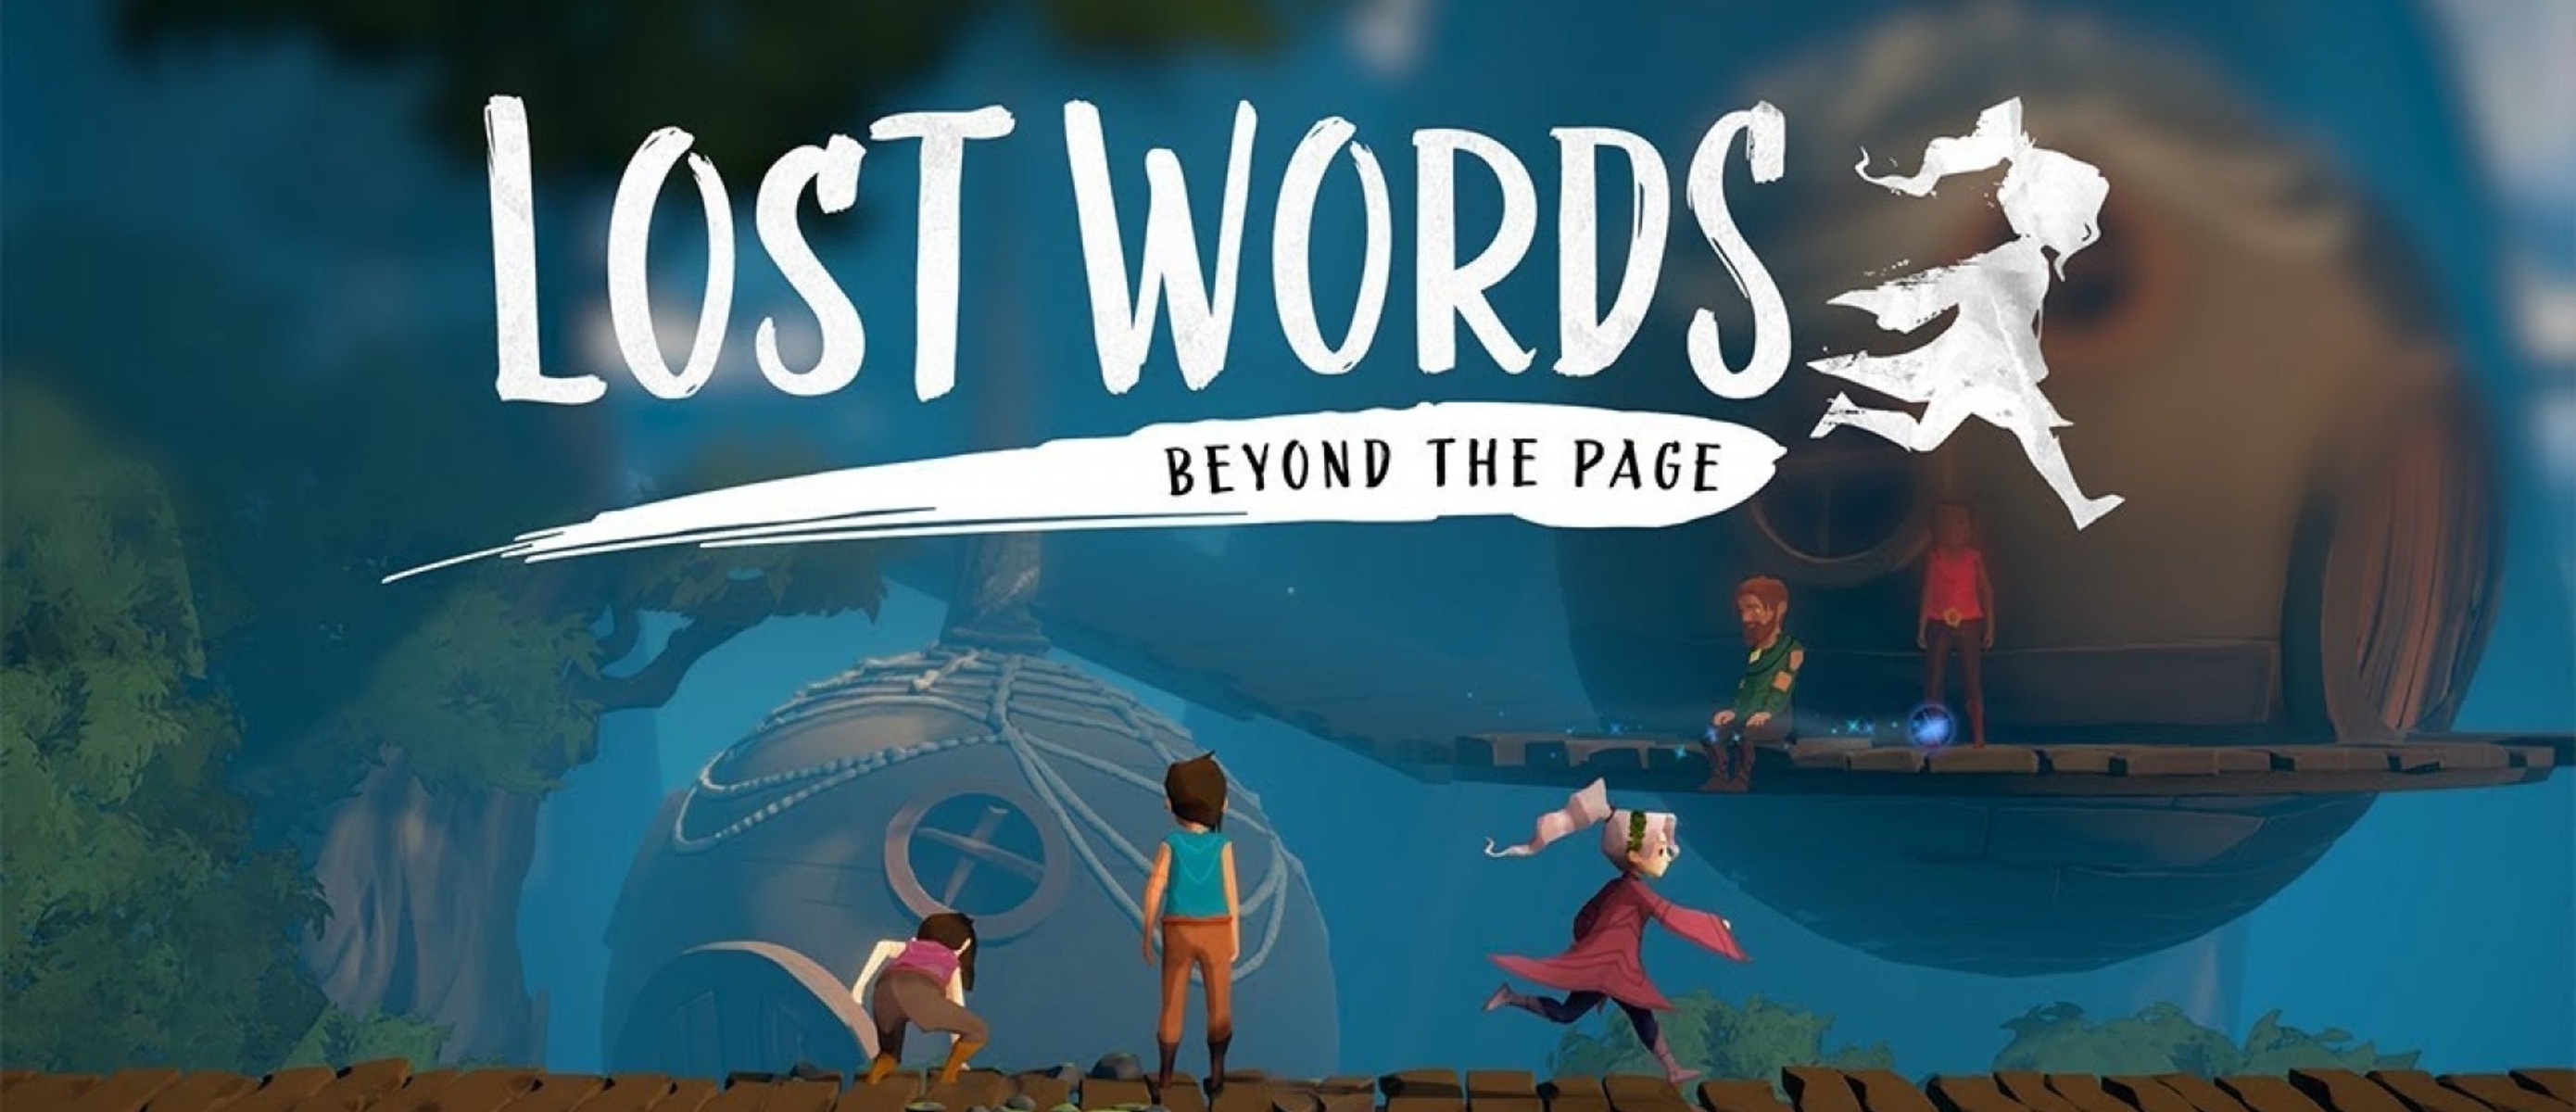 We are losing game. Lost Words: Beyond the Page. Lost Worlds Beyond the Page. The Lost игра 2021. Lost Words Beyond the Page ps4.